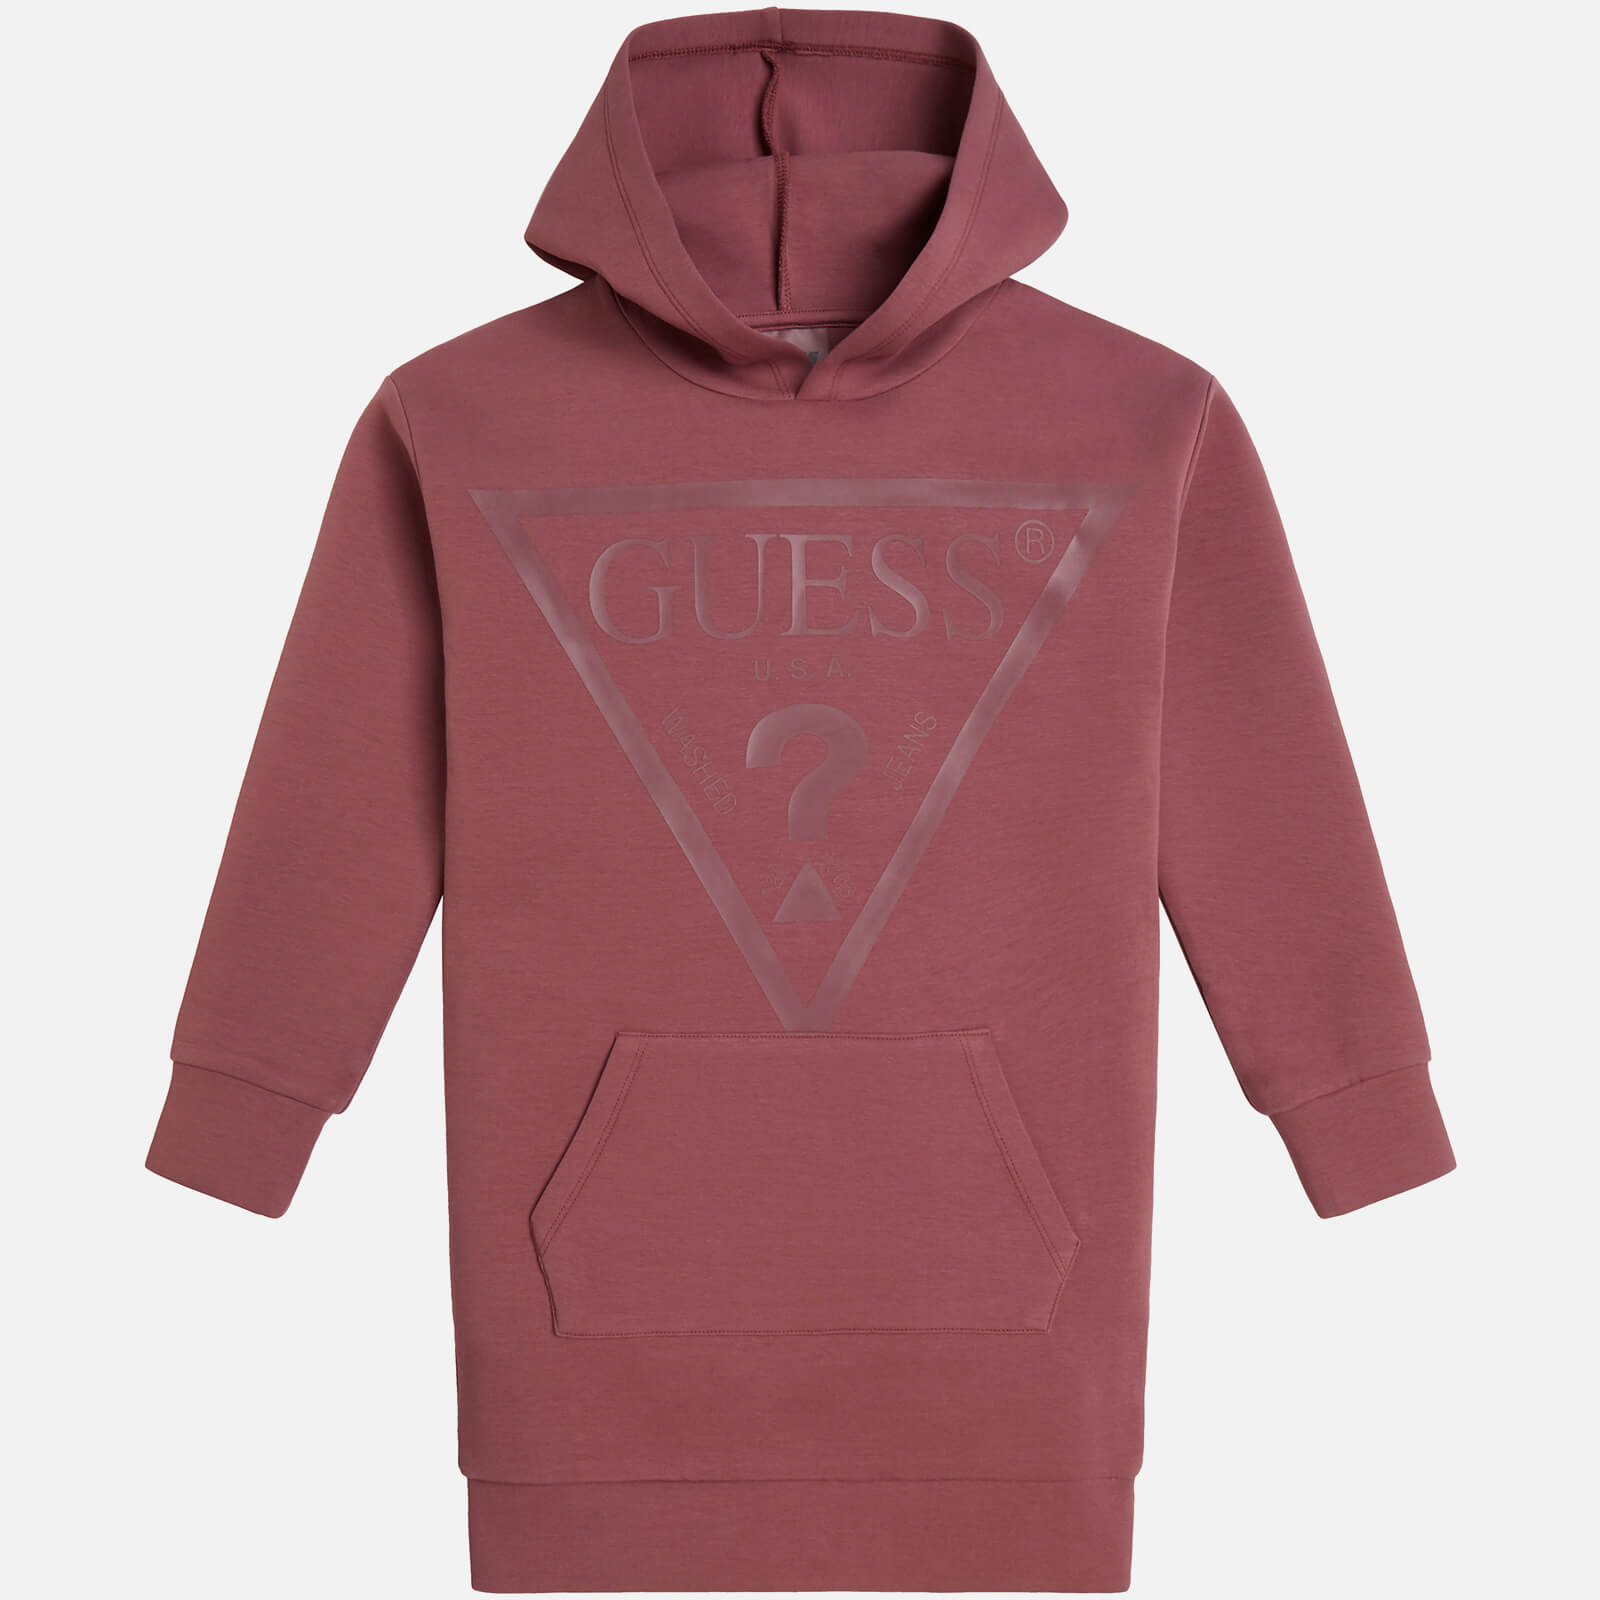 Guess Girls' Logo-Printed Cotton-Blend Hooded Dress - 12 Years von Guess